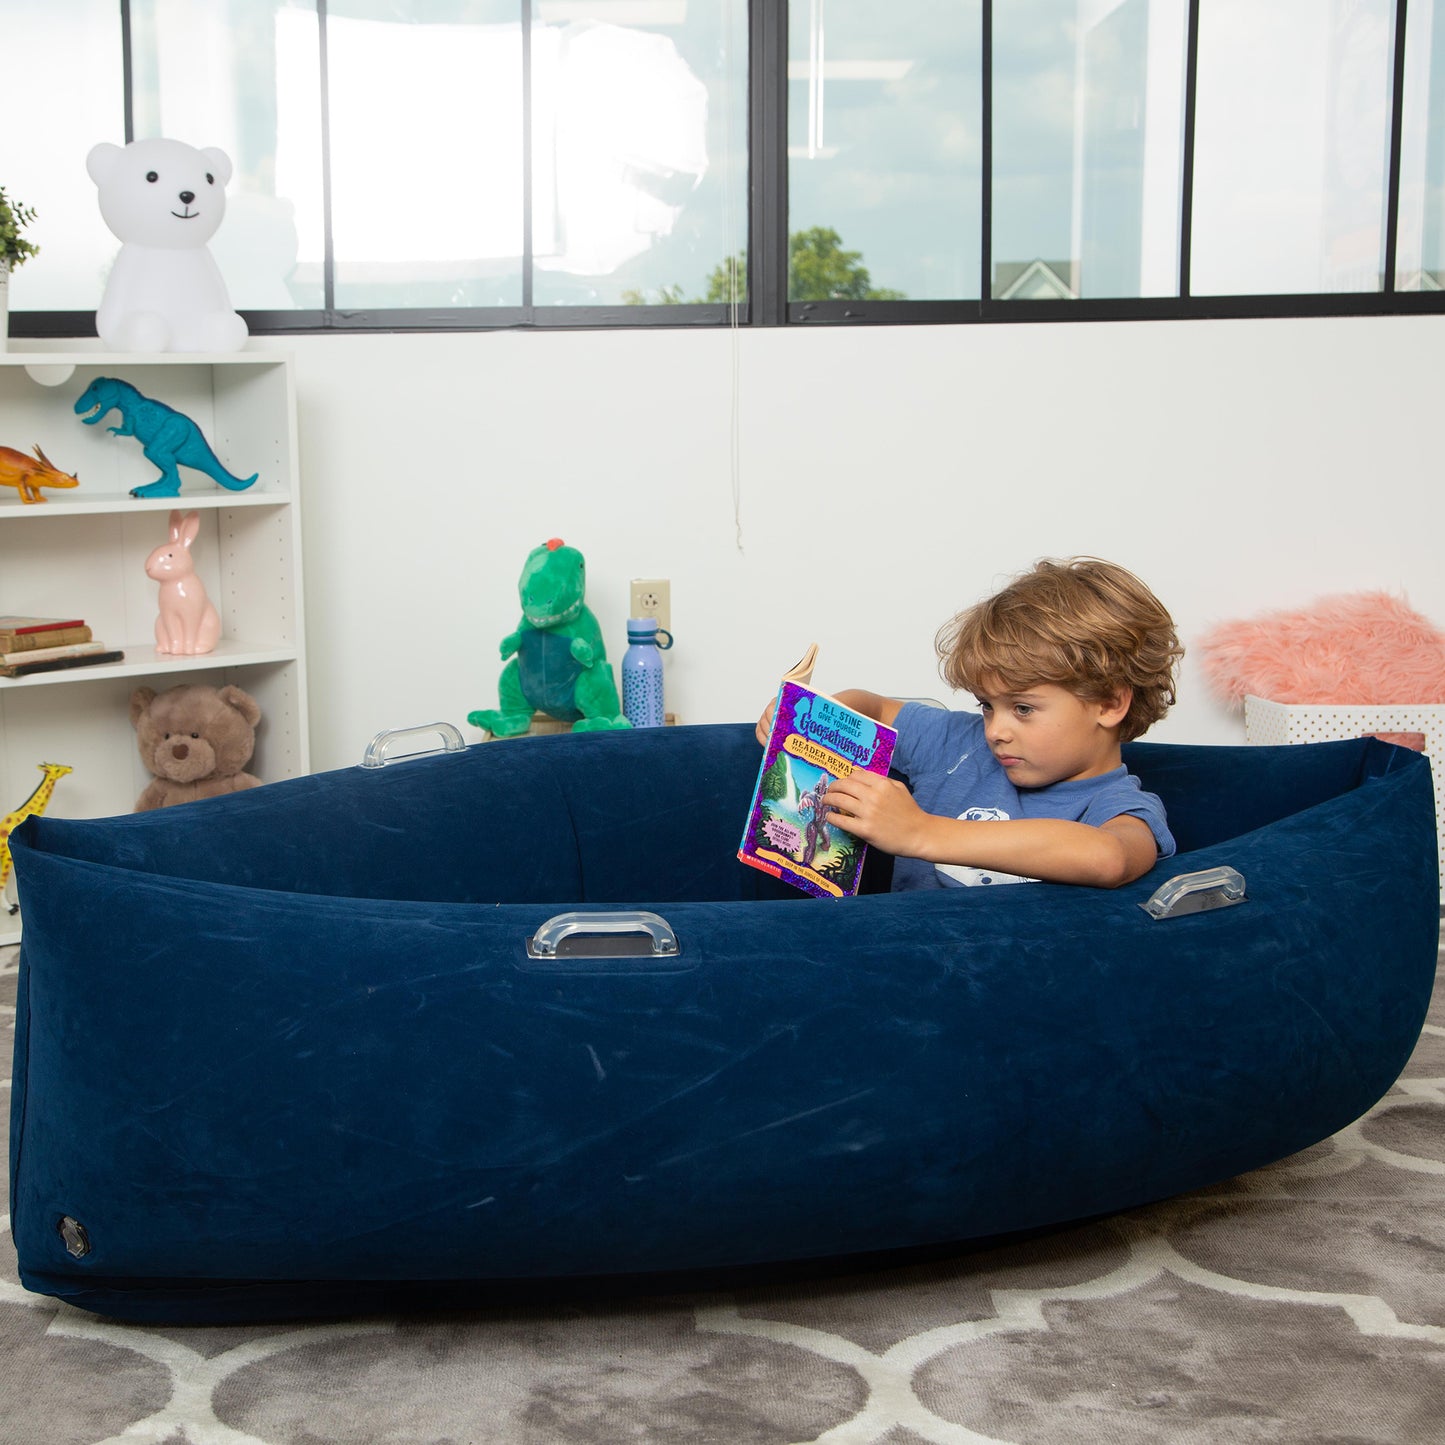 Comfy Hugging Peapod Sensory Pod, 60", Ages 6-12 Up to 3-5'1" Tall, Blue